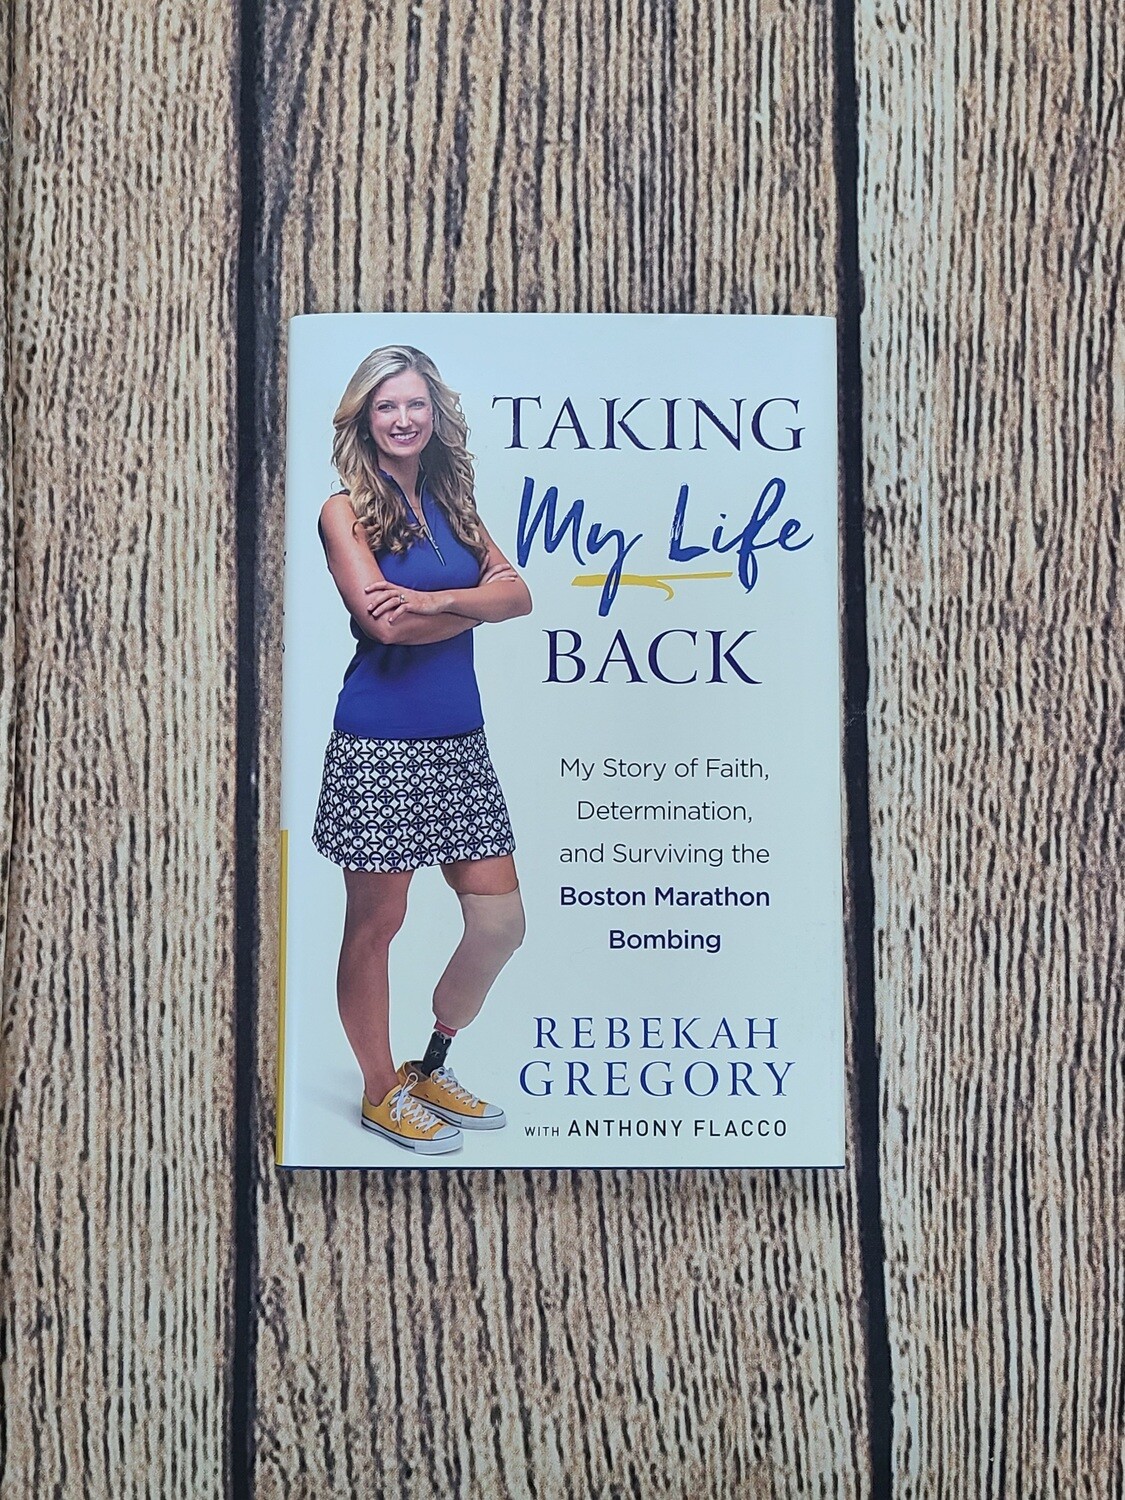 Taking my Life Back by Rebekah Gregory